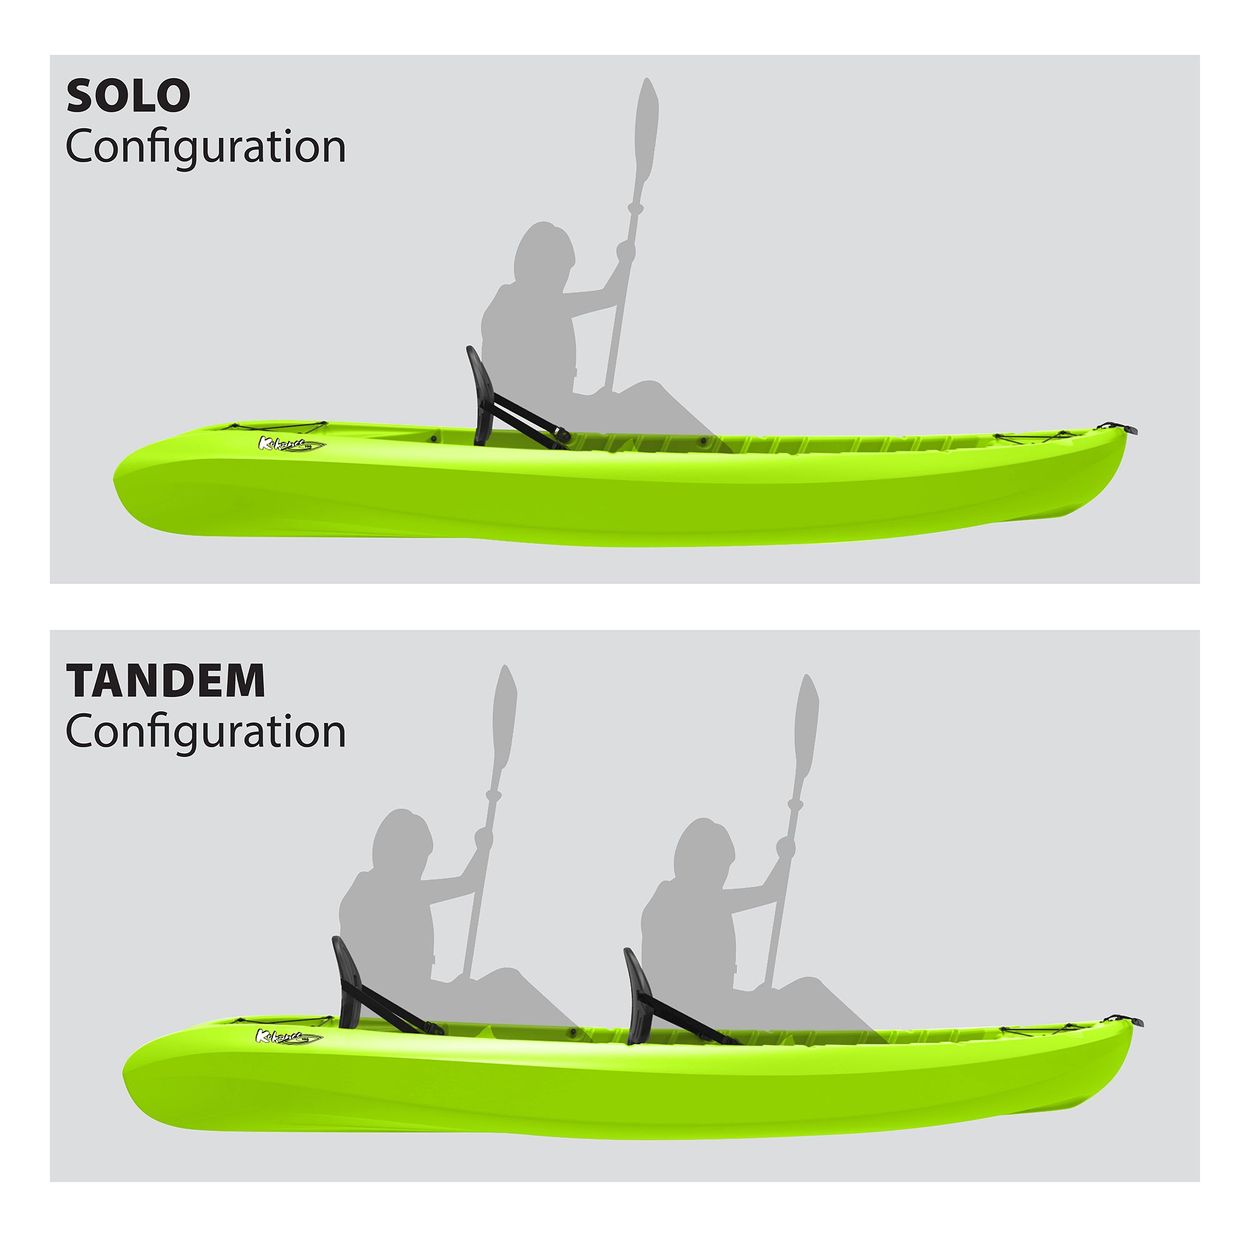 Configuration image of Solo and Tendem options for the kayak, side views of the kayak for best view